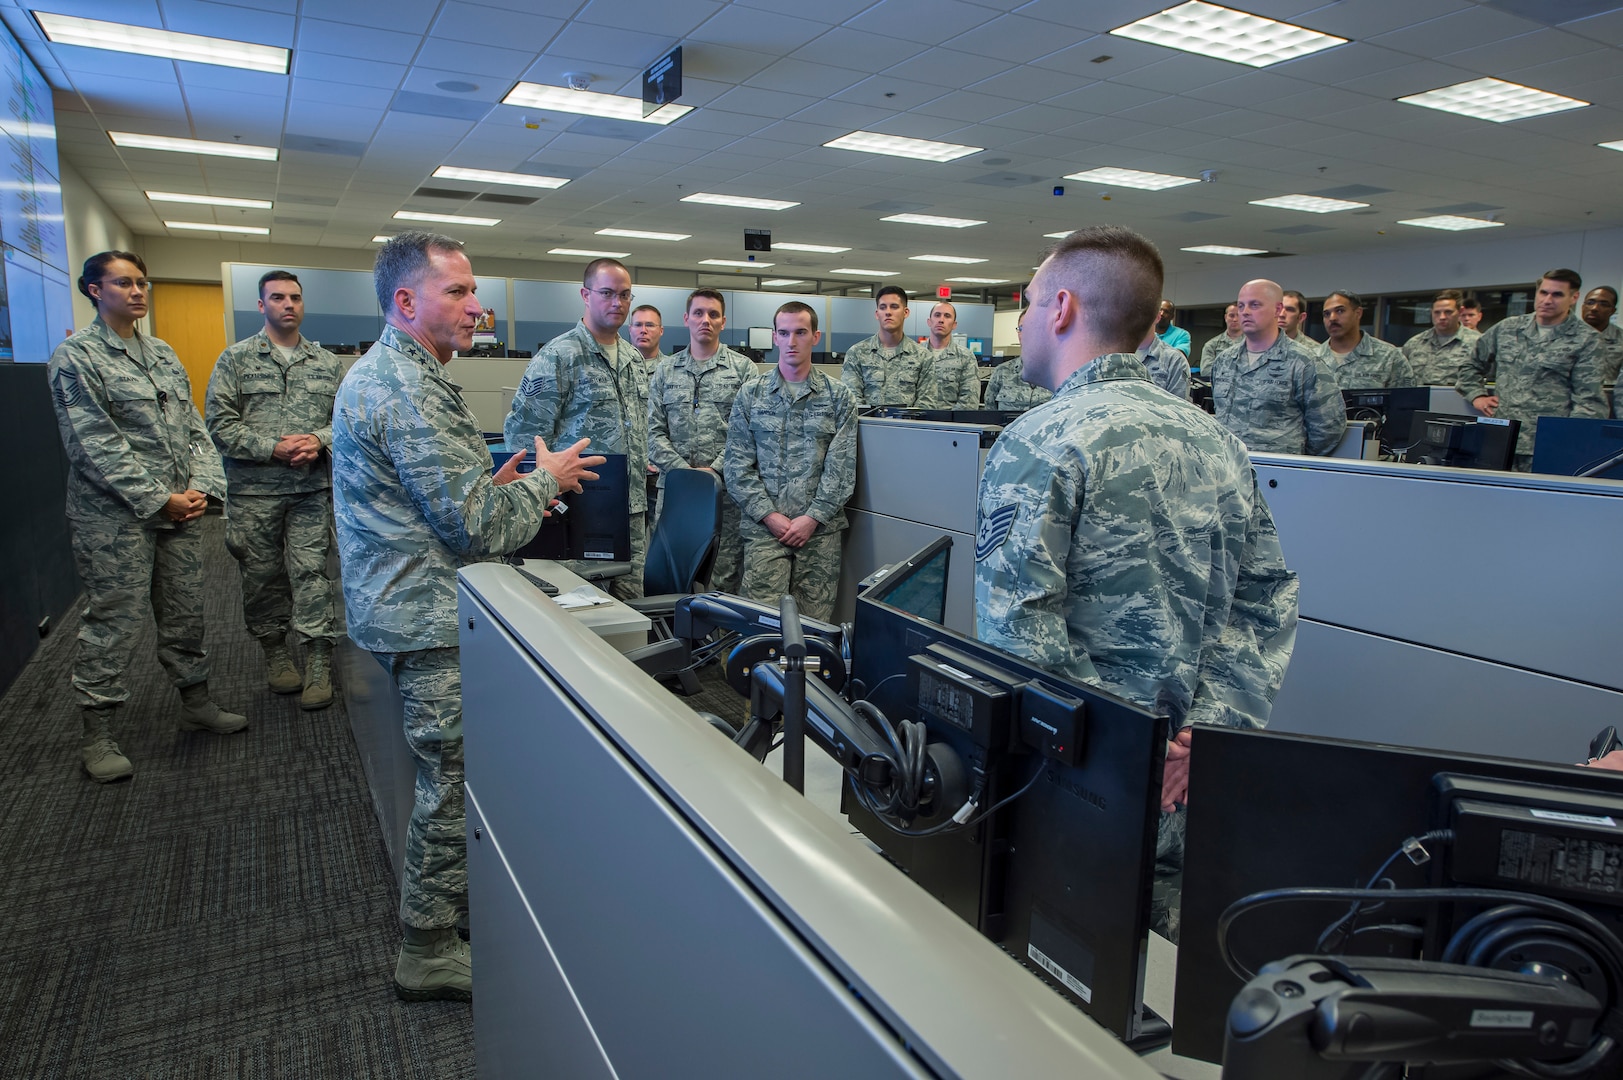 Air Force Vice Chief of Staff Gen. David L. Goldfein speaks to personnel within the 624th Operations Center during a visit at Joint Base San Antonio, Texas March 3. Goldfein received briefings focused on 24th Air Force – AFCYBER’s command and control of cyber forces and took the opportunity to personally thank the cyber warriors as well as to stress the significance of cyber in today’s multi-domain operations. (U.S. Air Force photo by MSgt Luke P. Thelen/Released)